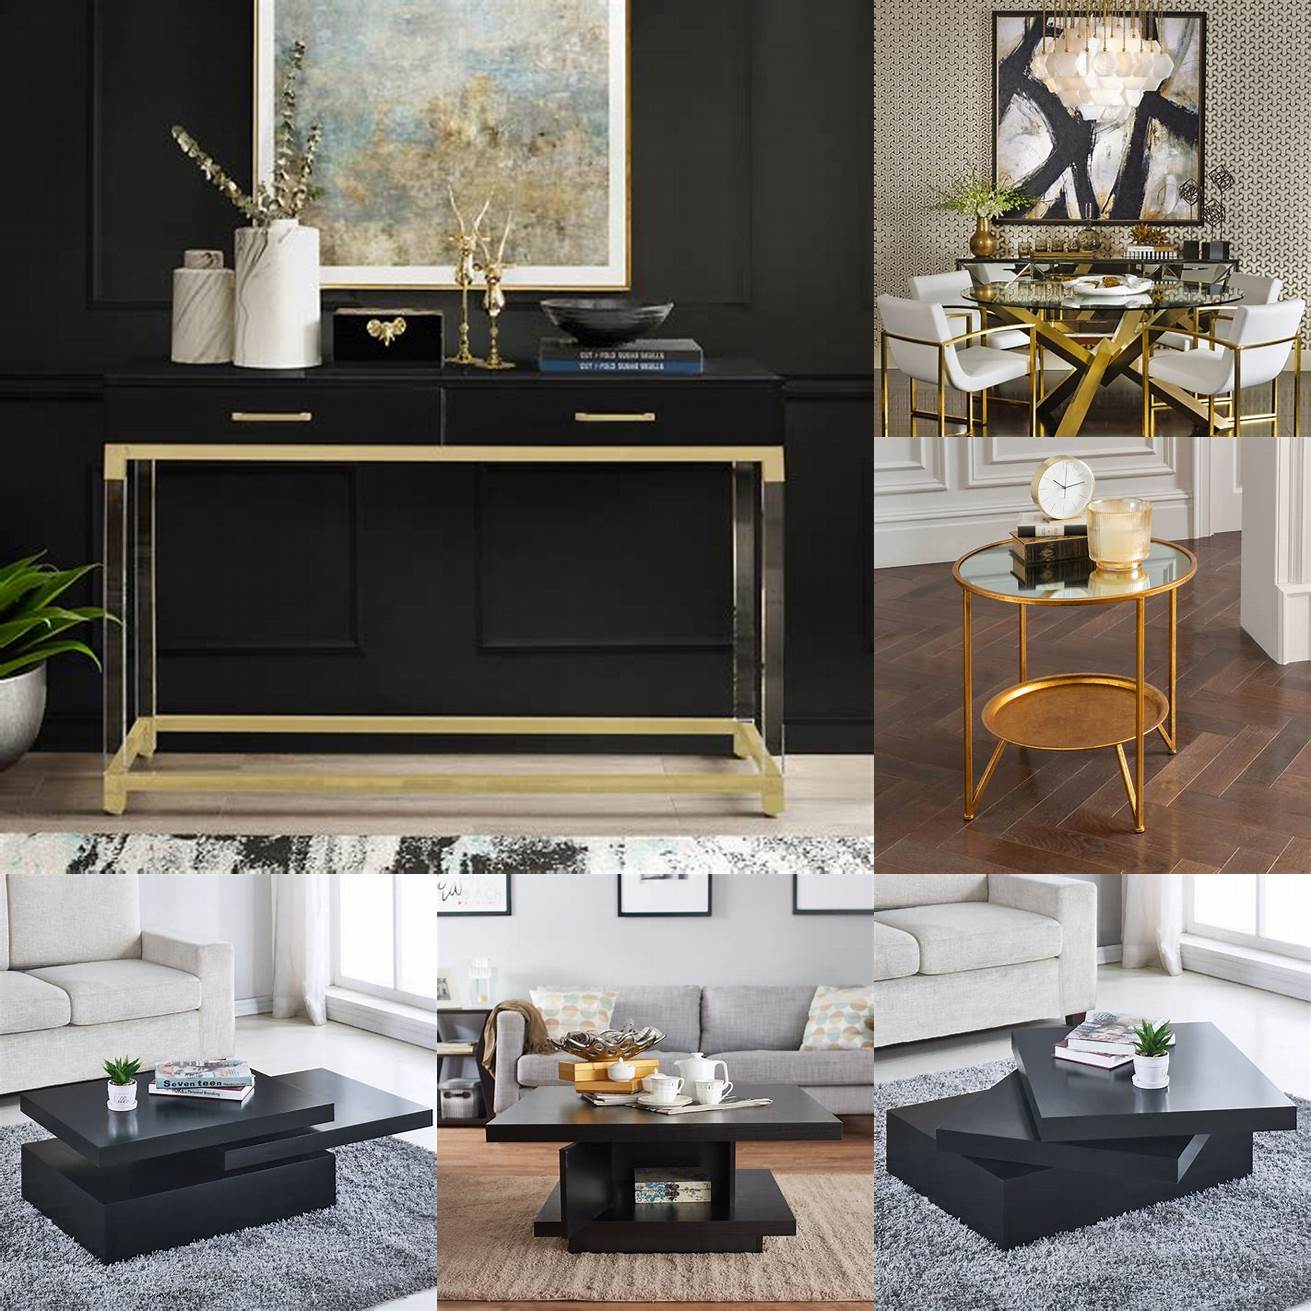 A modern black square table with gold accents